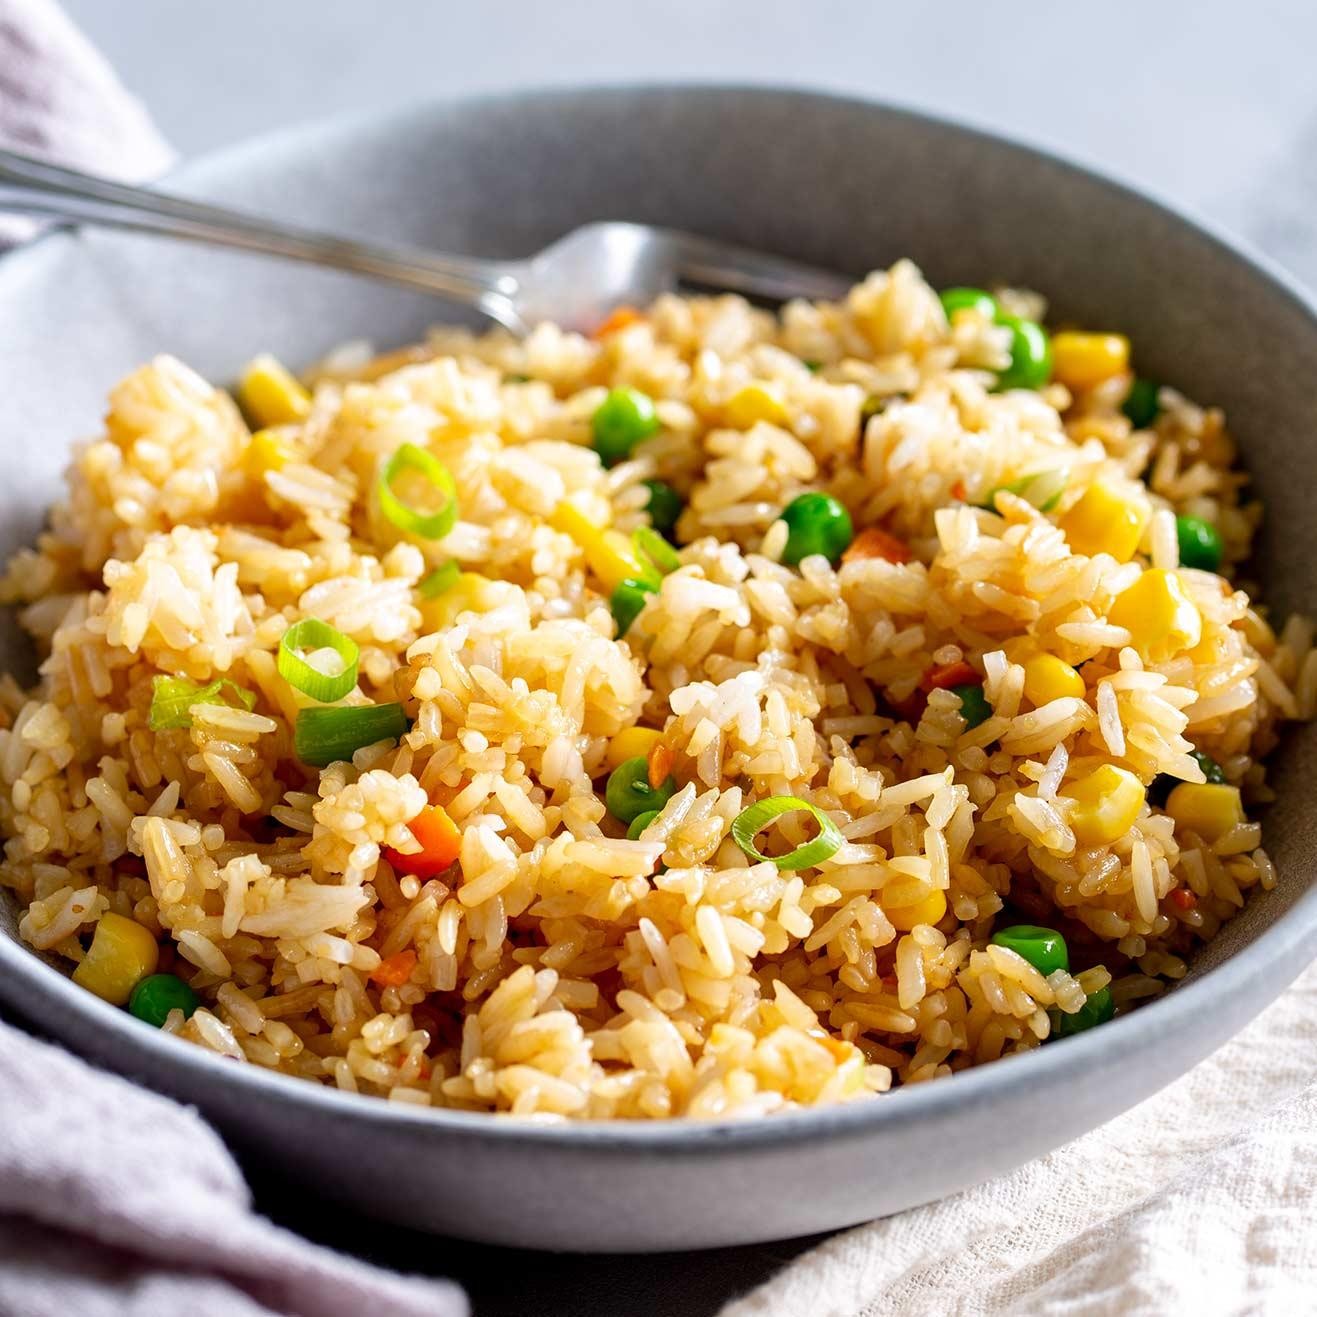 NEW! $5 FRIED RICE